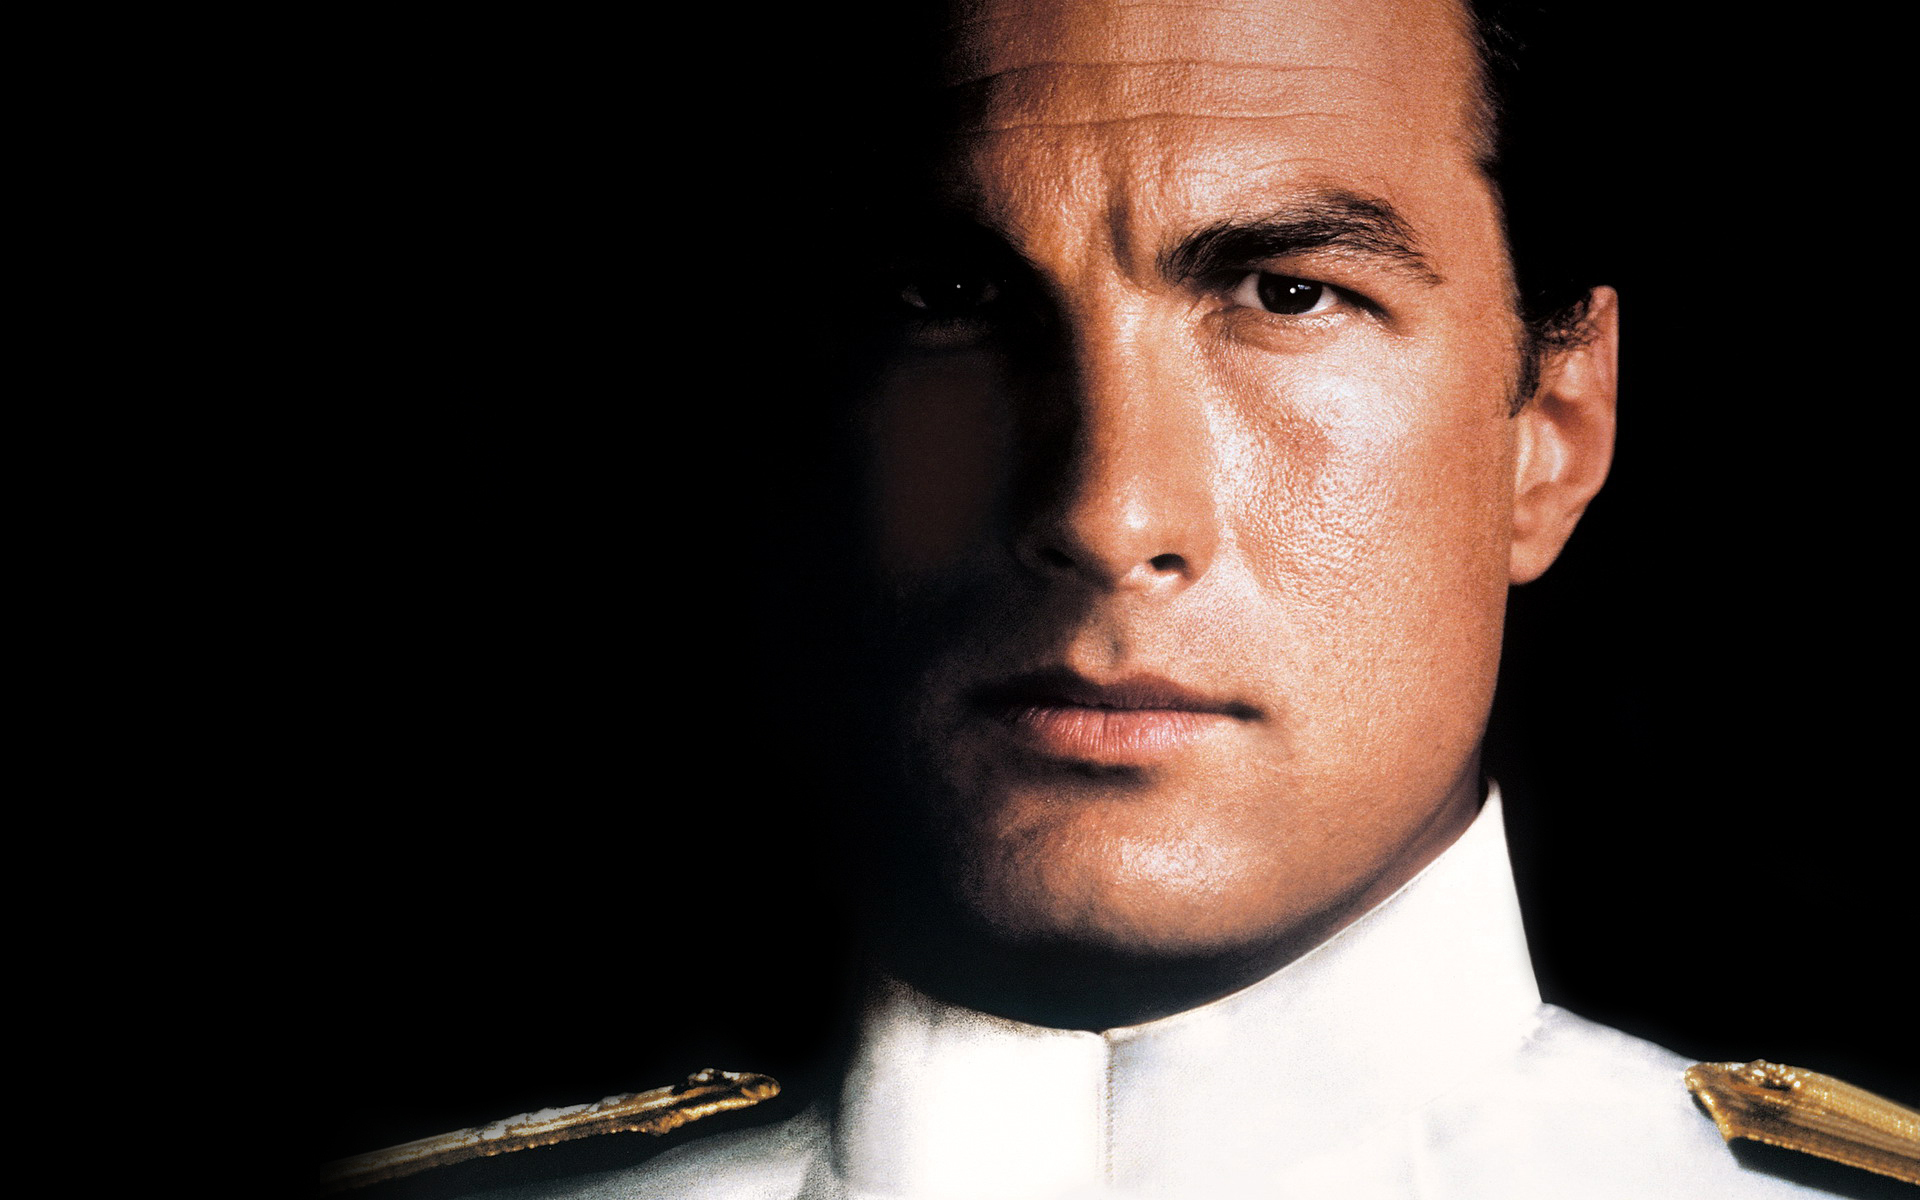 Famous Steven Seagal Wallpaper And Image